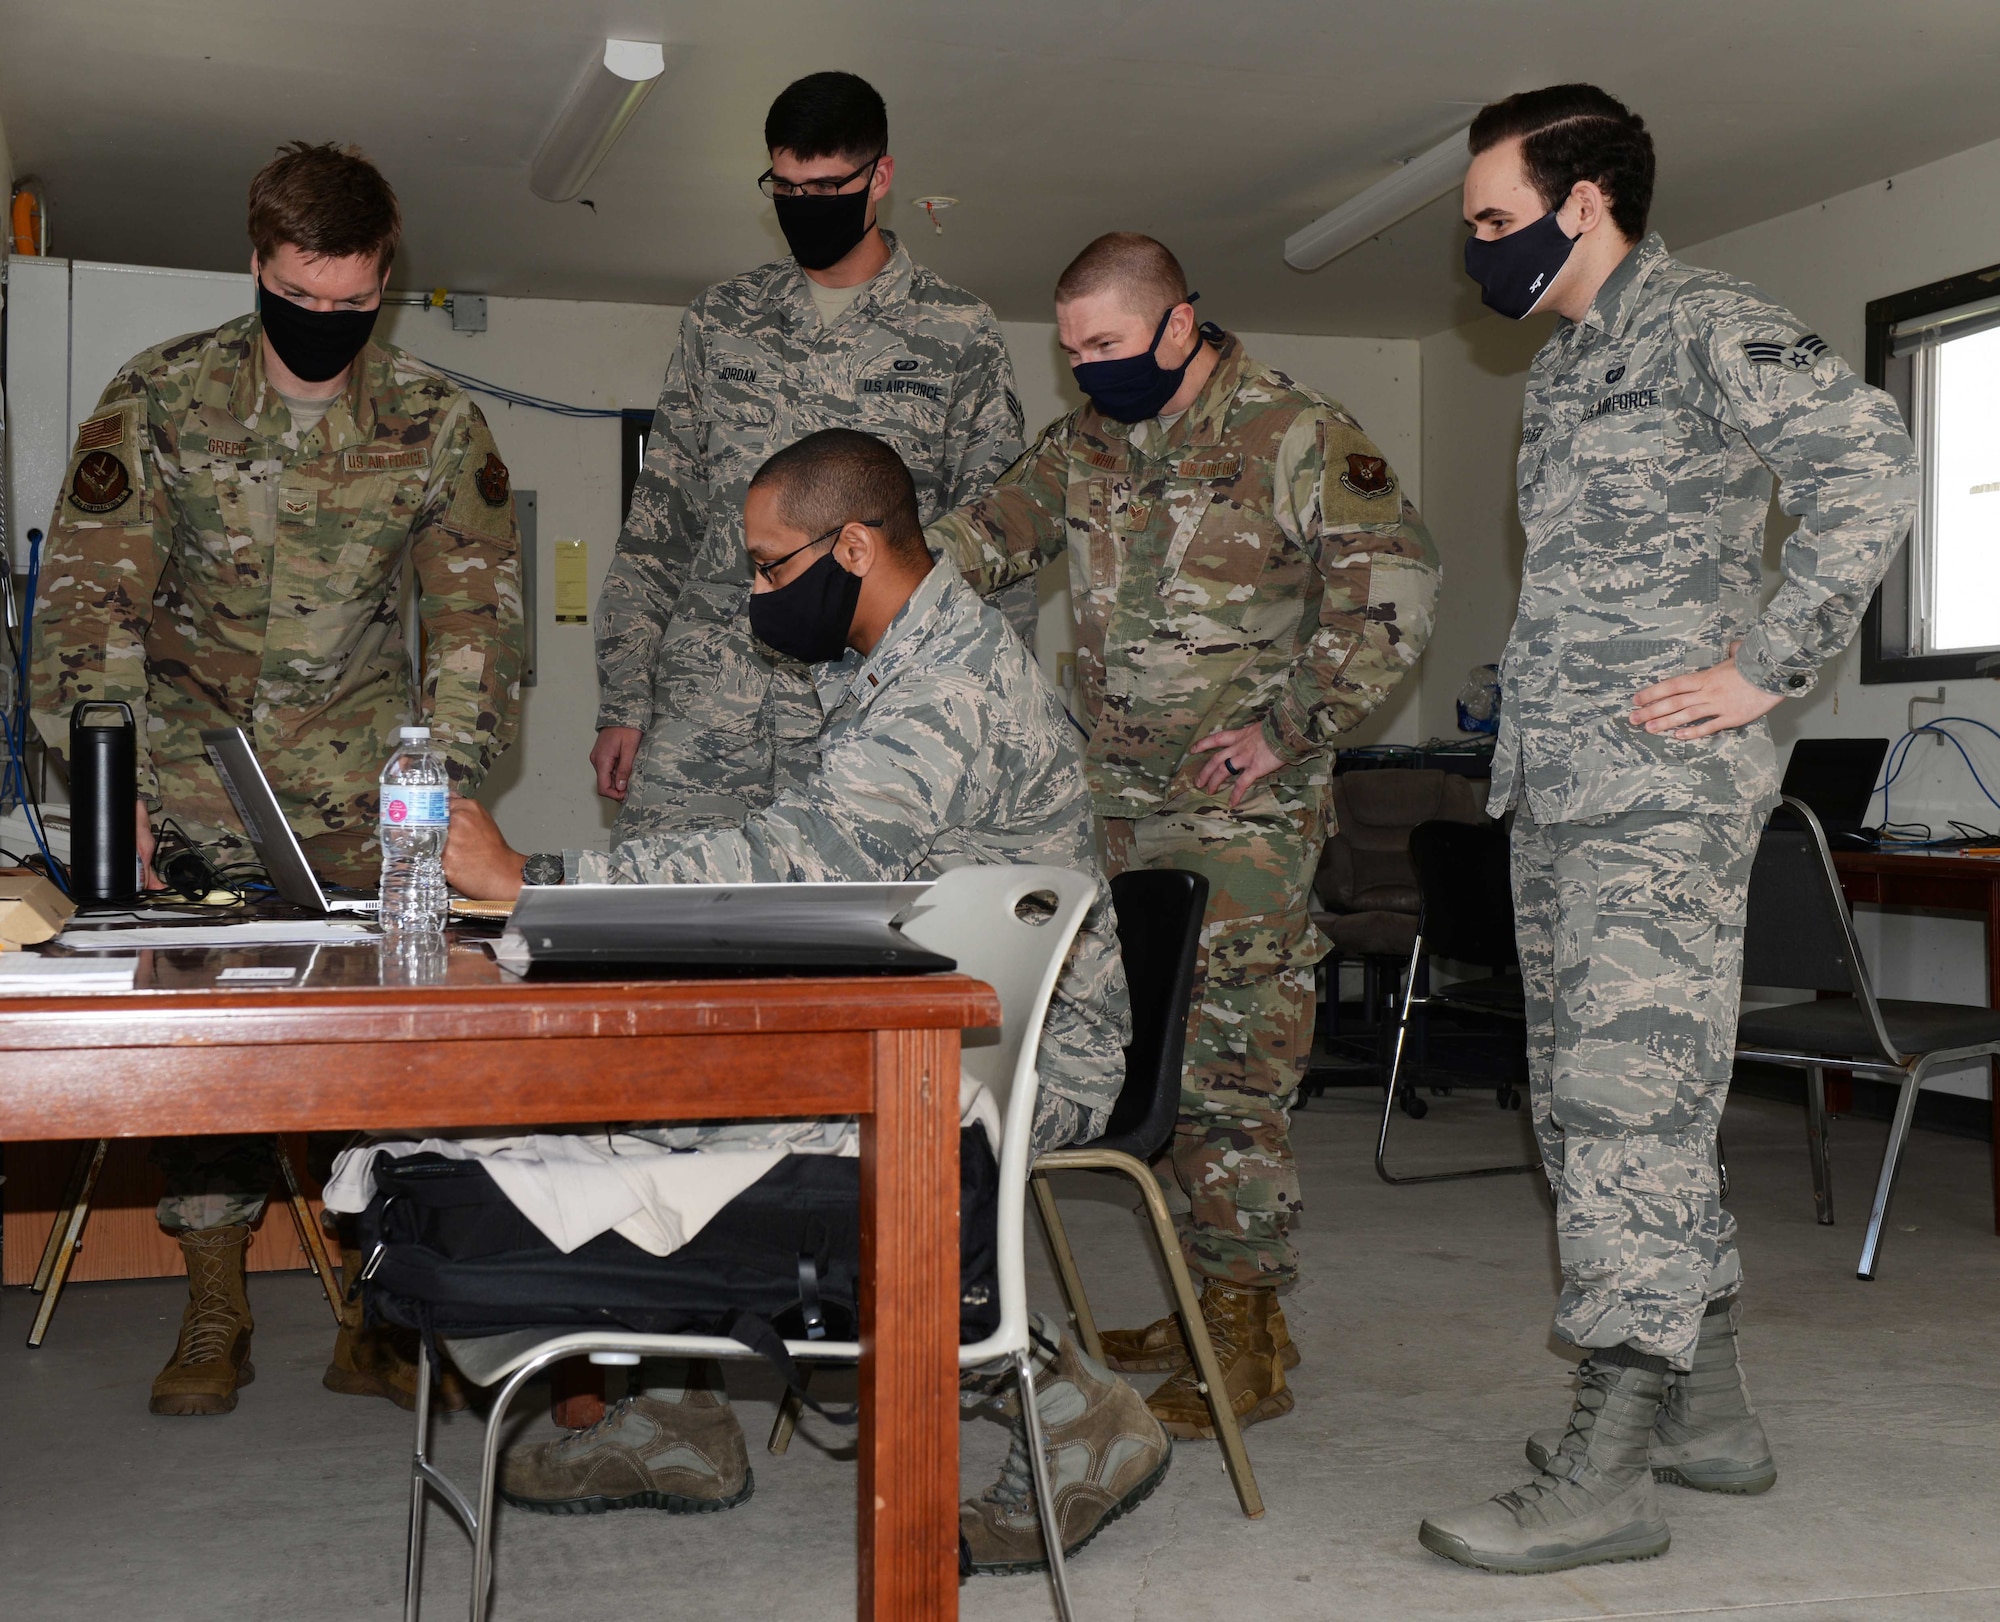 Contracting Airmen work on contracts